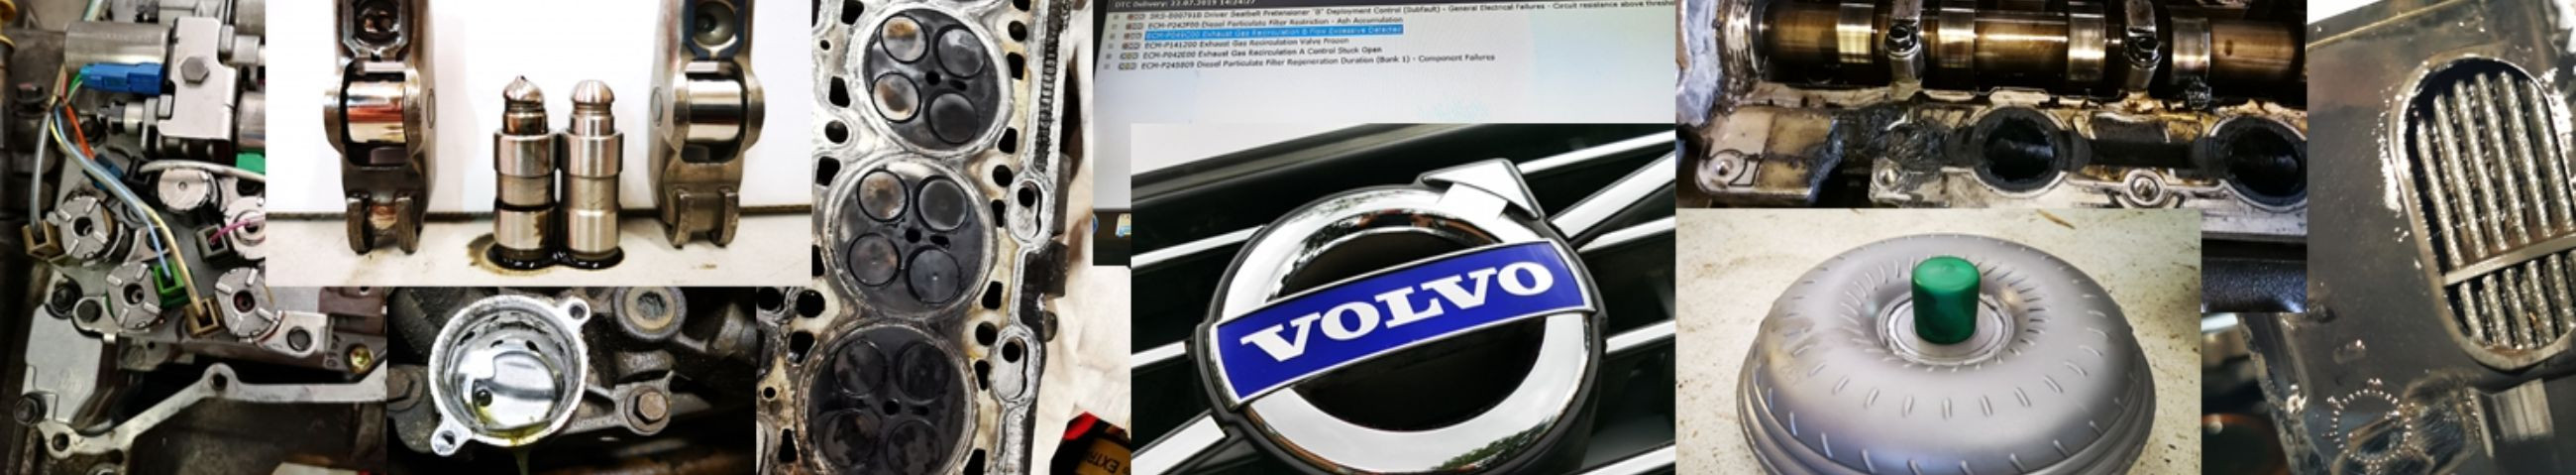 new and used spare parts for volvos, Construction, Construction, volvo passenger car repair, volvo passenger car maintenance, volvo service center, real estate development, construction services, construction services, volvo car repair